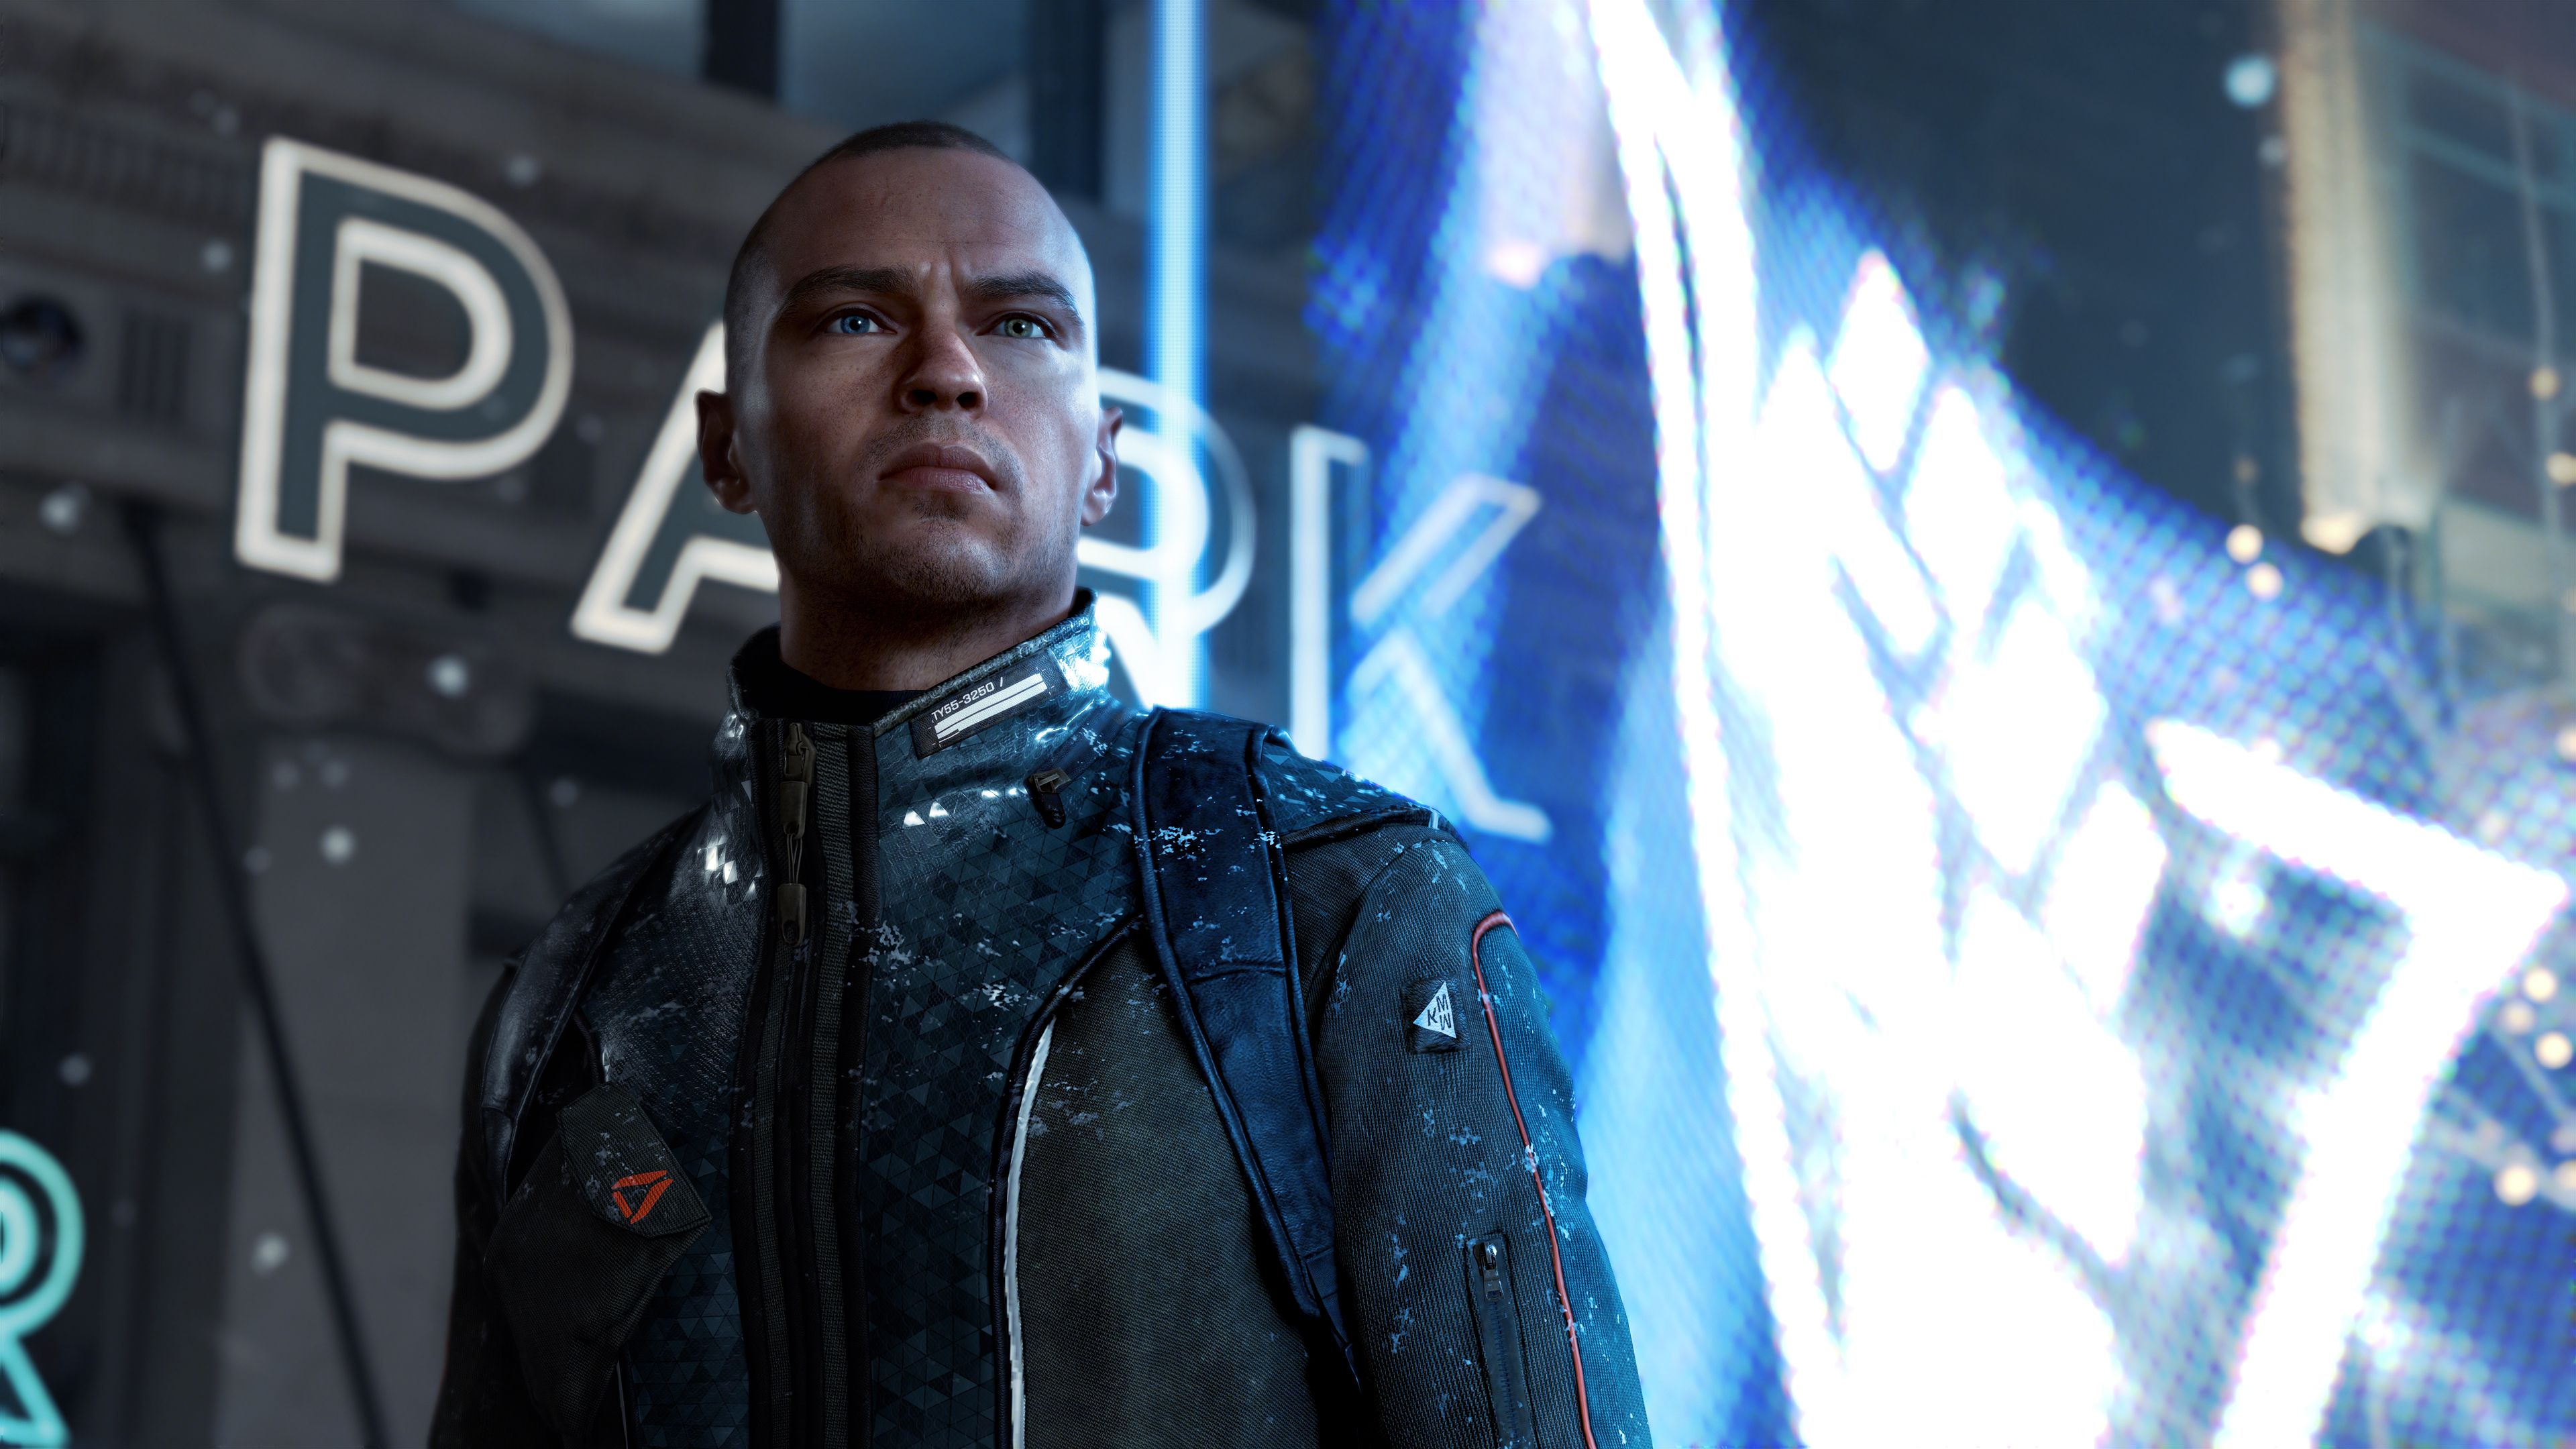 Markus Detroit Become Human 4k, HD Games, 4k Wallpaper, Image, Background, Photo and Picture